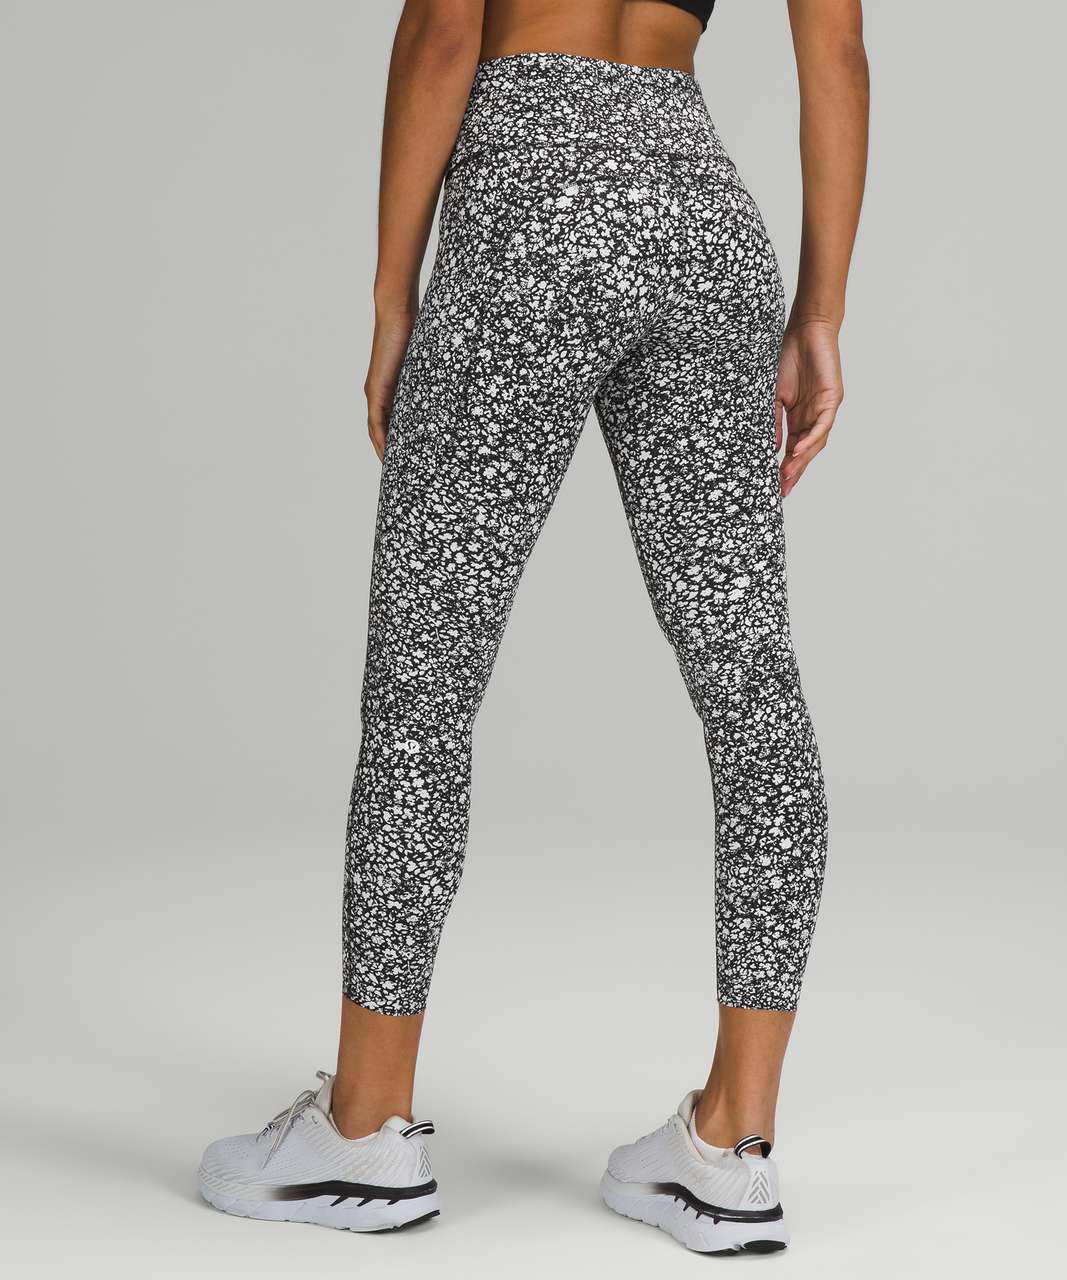 Lululemon Fast and Free High-Rise Tight 25" *Nulux - Venture Floral Alpine White Black